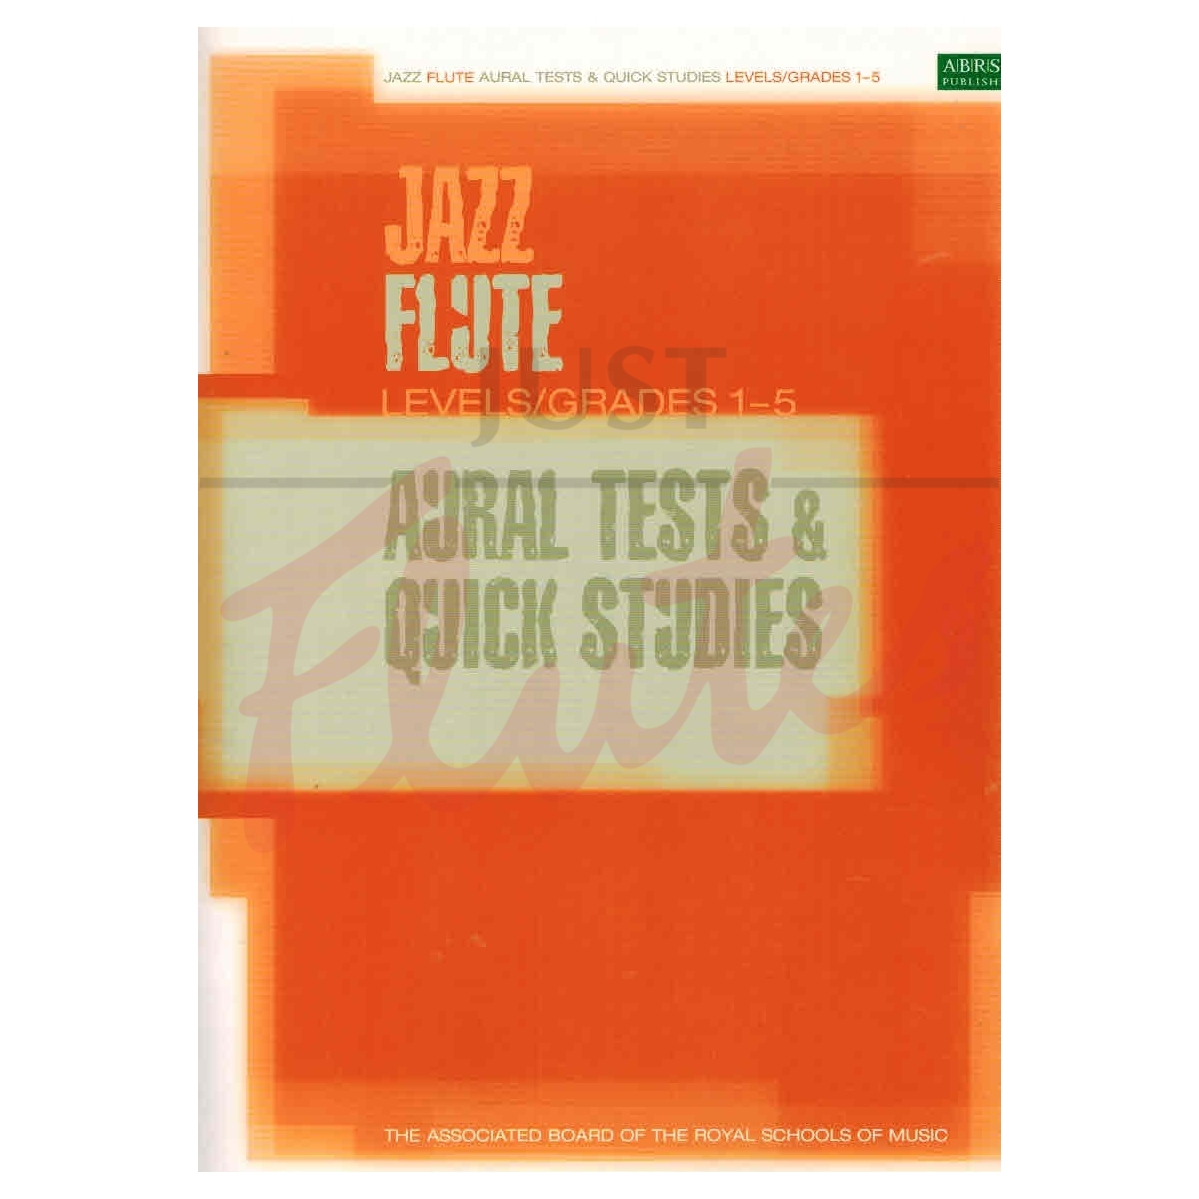 Jazz Flute Aural Tests and Quick Studies Levels 1-5